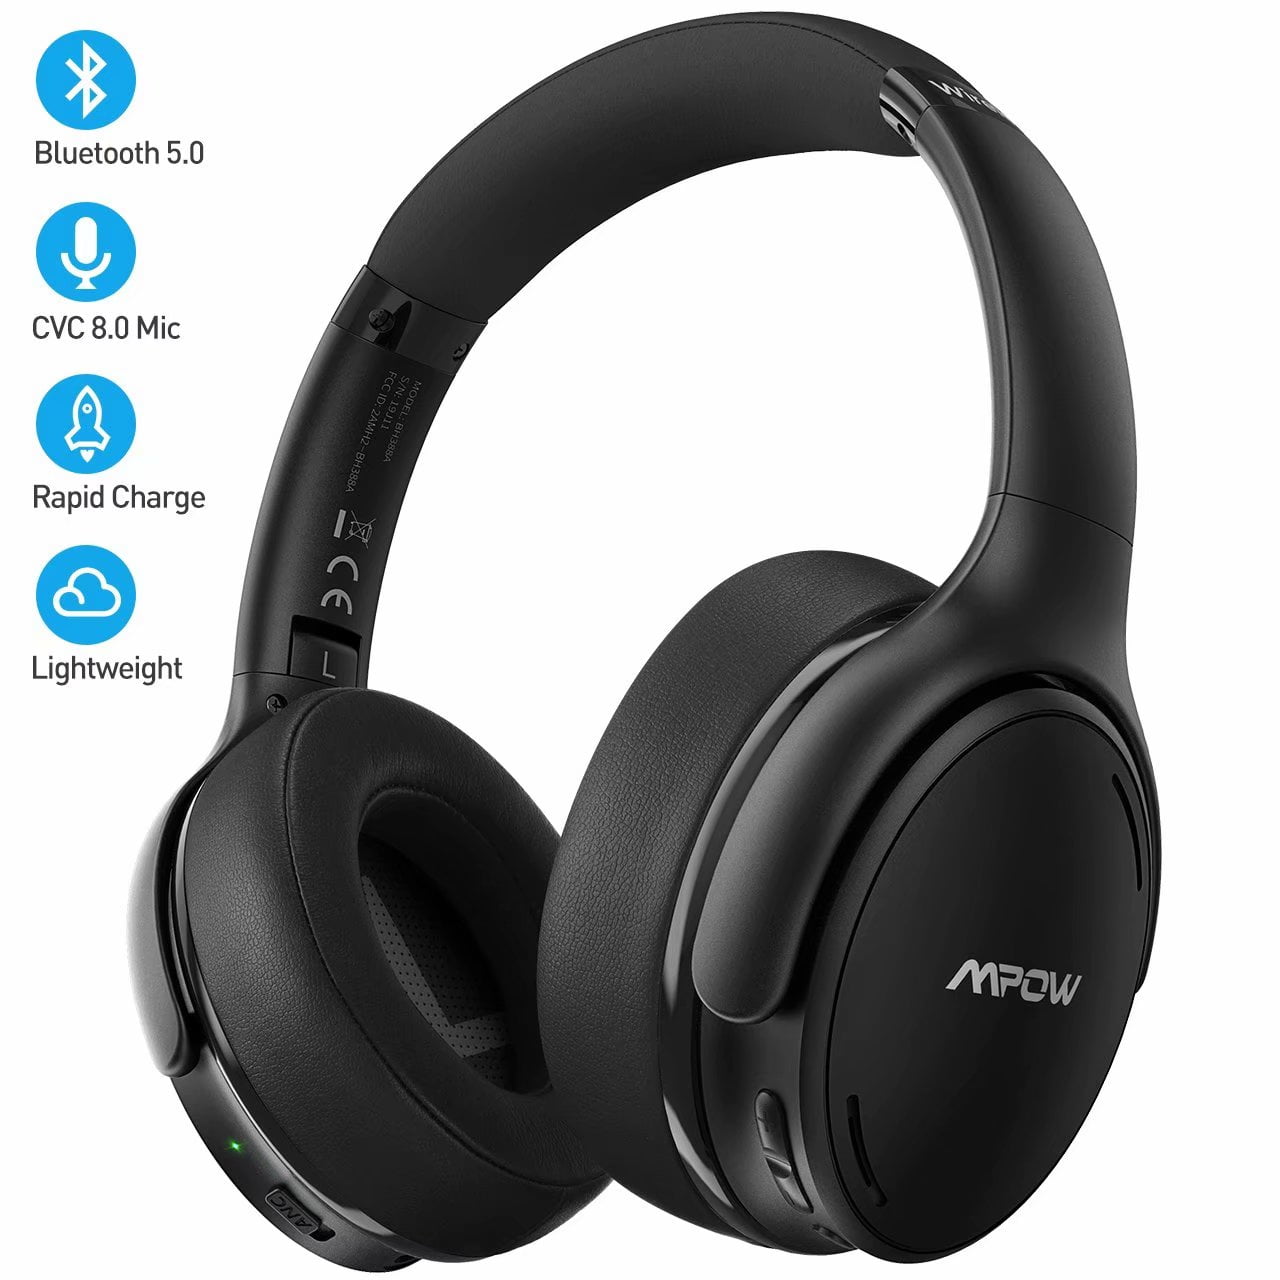 Mpow H12 Hybrid Active Noise Cancelling Headphones 2019 Version Soft Protein Earpads with Hi-Fi Deep Bass CVC 6.0 Microphone Bluetooth Headphones Over Ear 30H Playtime for TV Travel Work